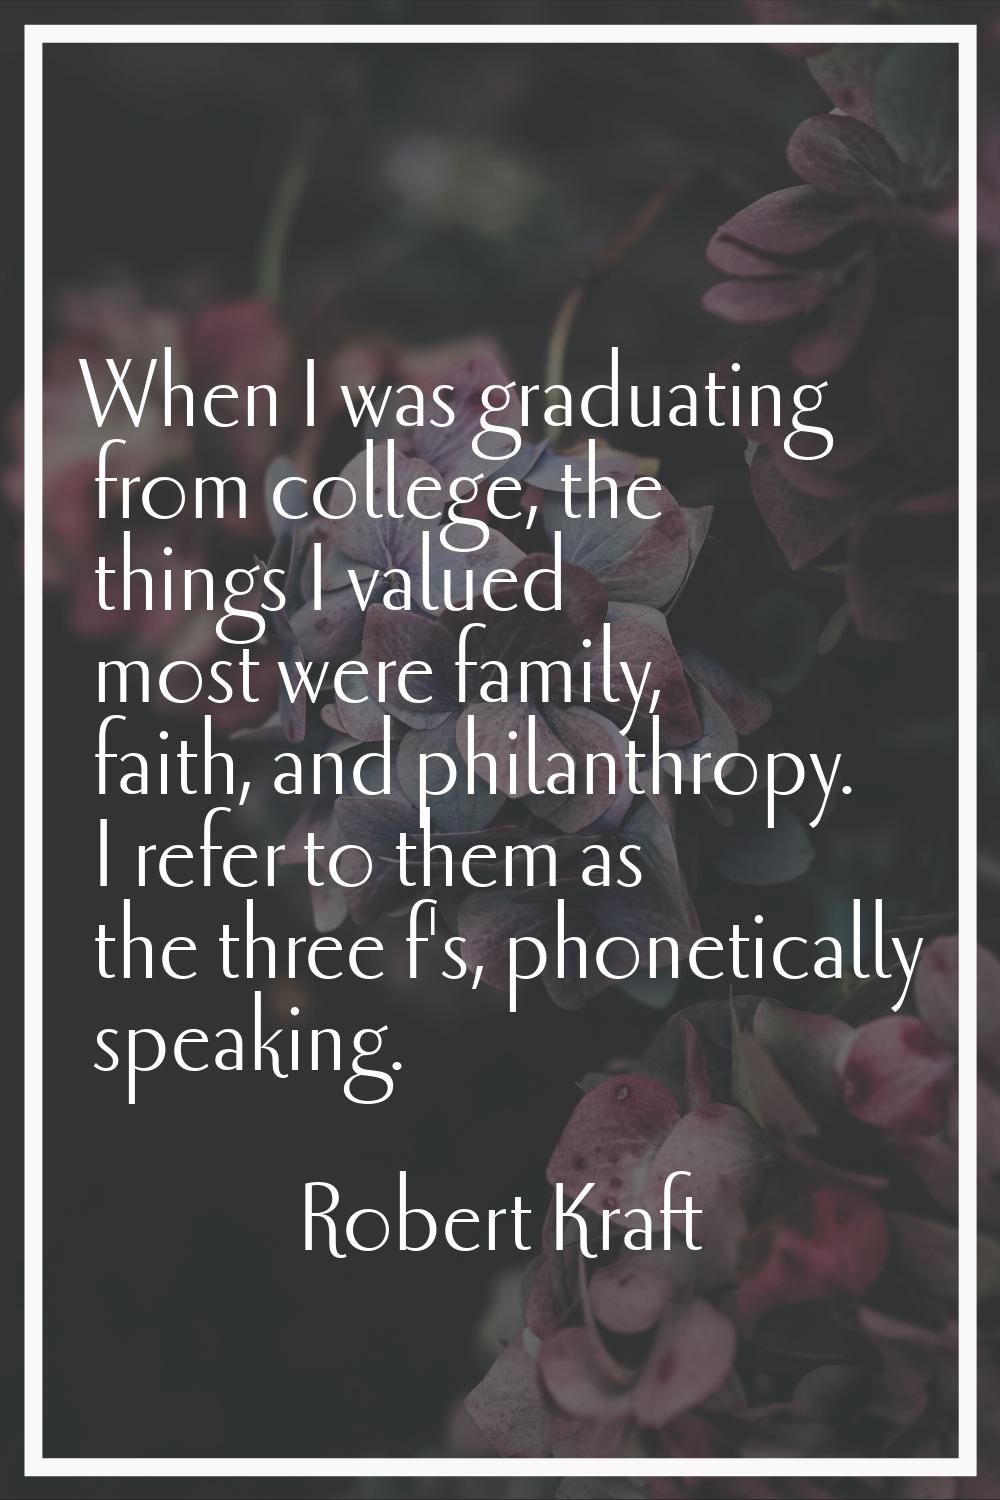 When I was graduating from college, the things I valued most were family, faith, and philanthropy. 